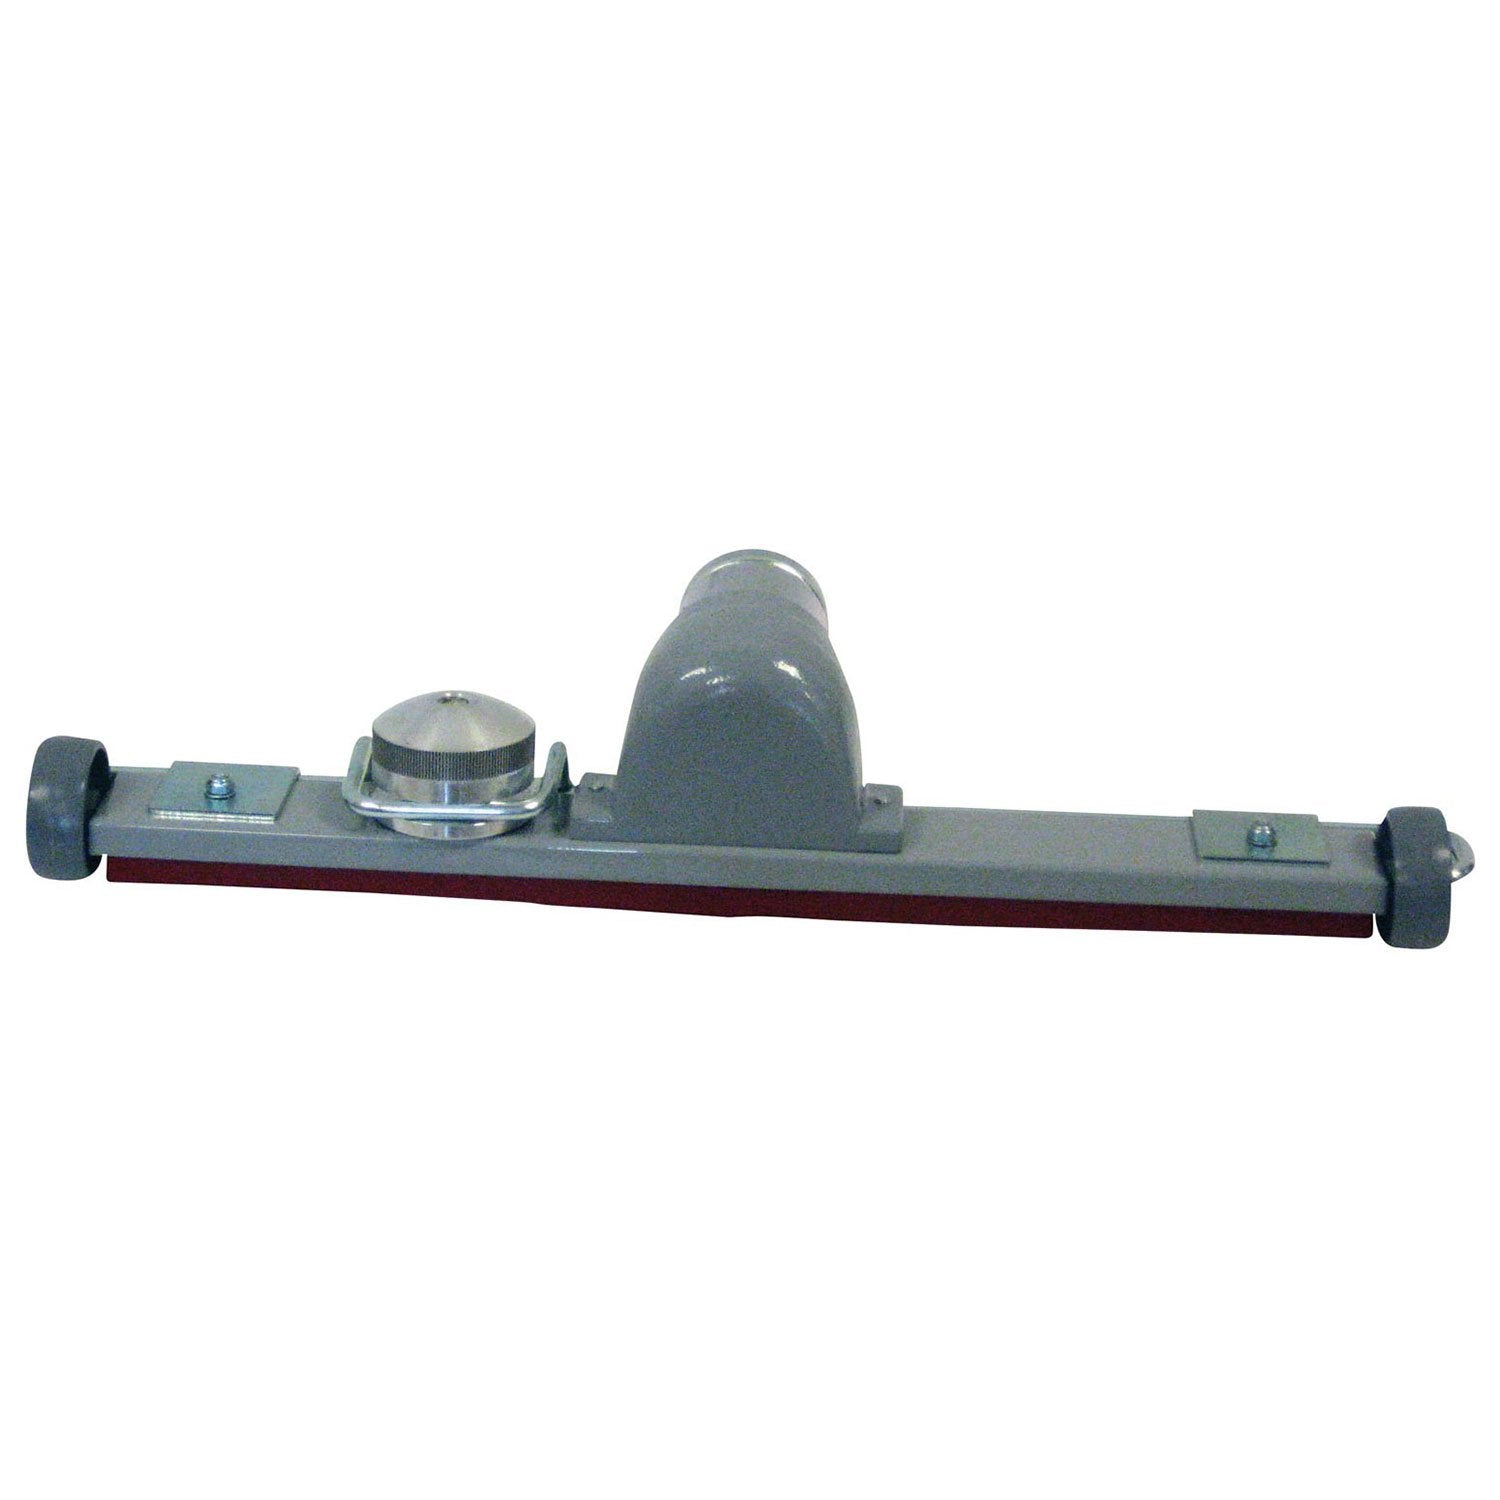 Nilfisk 16" L x 2" Dia. Wheeled Floor Nozzle w/Squeegee for VHS255 - CalCleaningEquipment